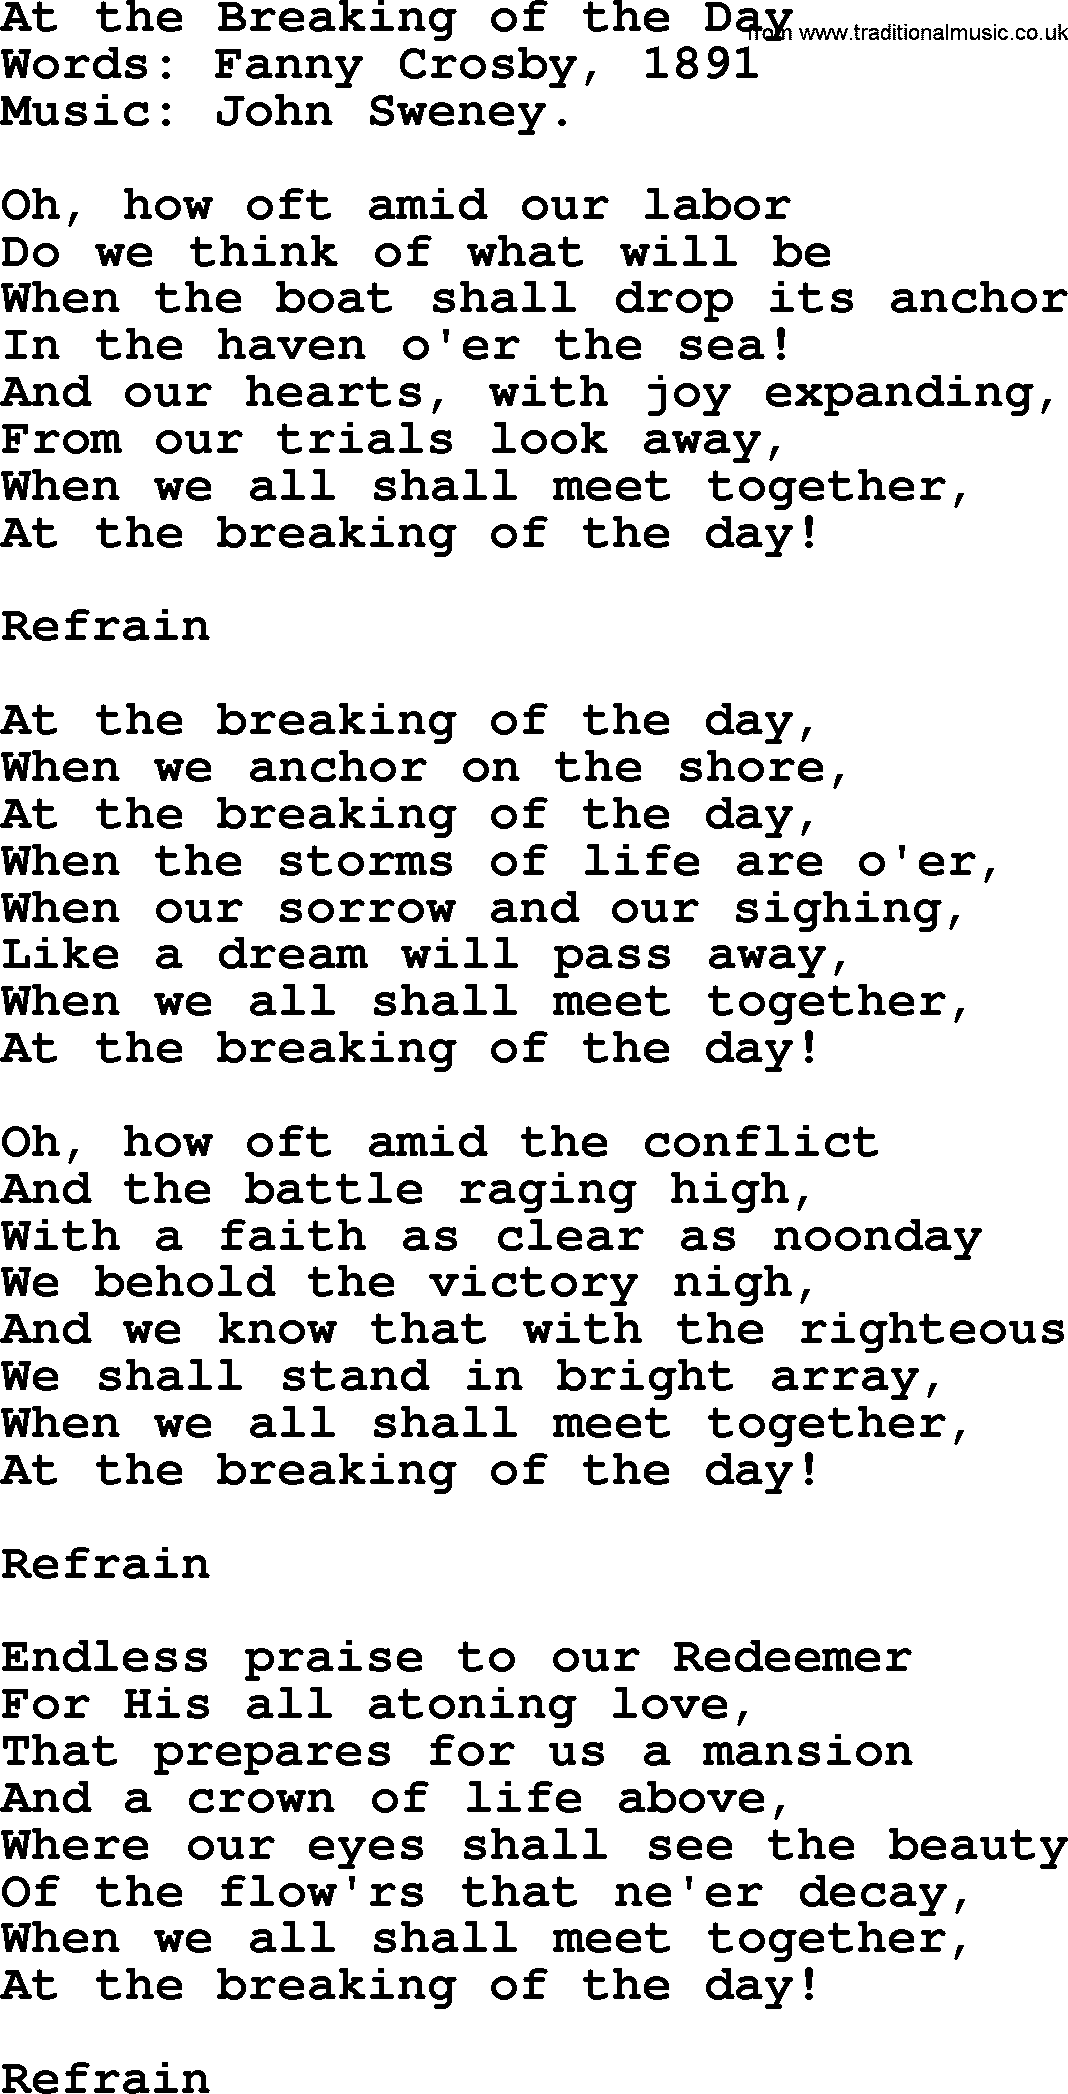 Songs and Hymns about Heaven: At The Breaking Of The Day lyrics with PDF